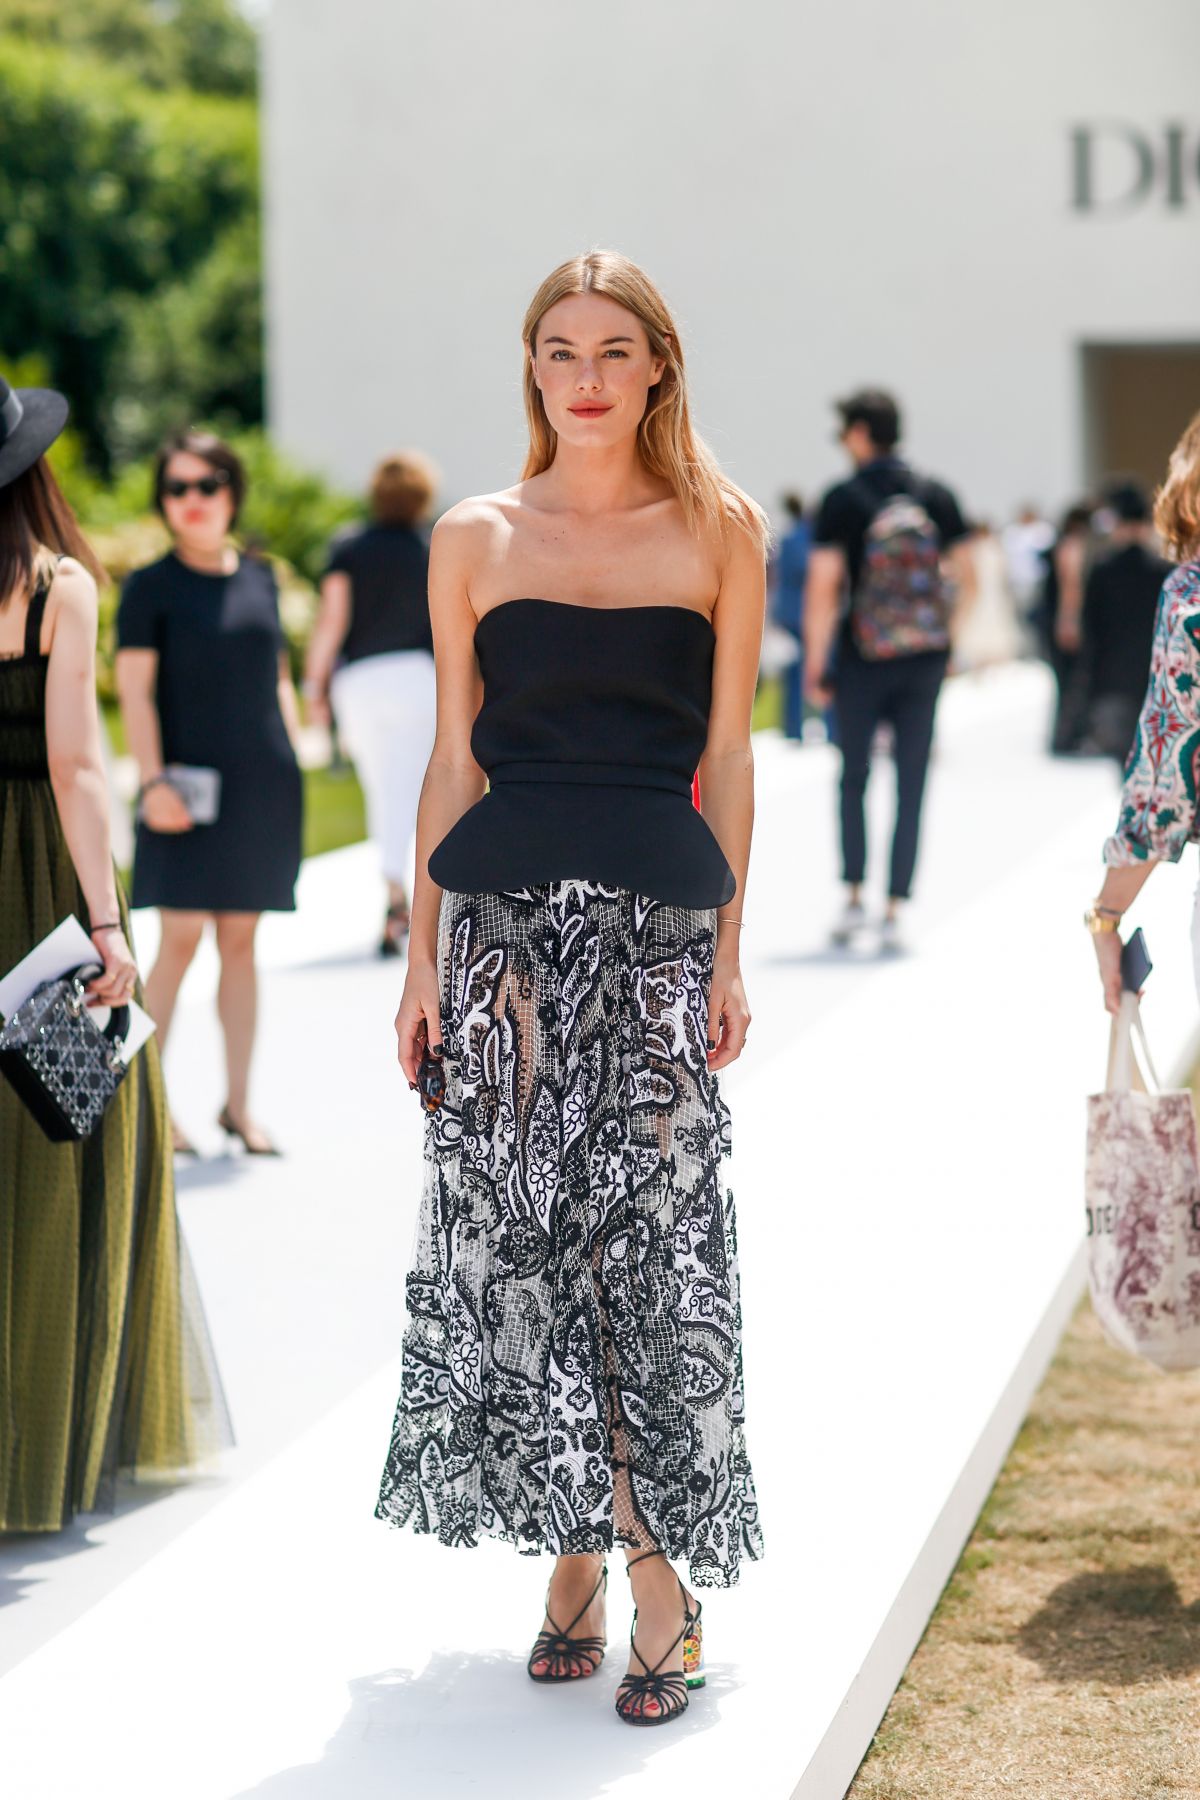 camille-rowe-at-dior-fall-winter-2018-2019-haute-couture-show-in-paris-07-02-2018-1.jpg